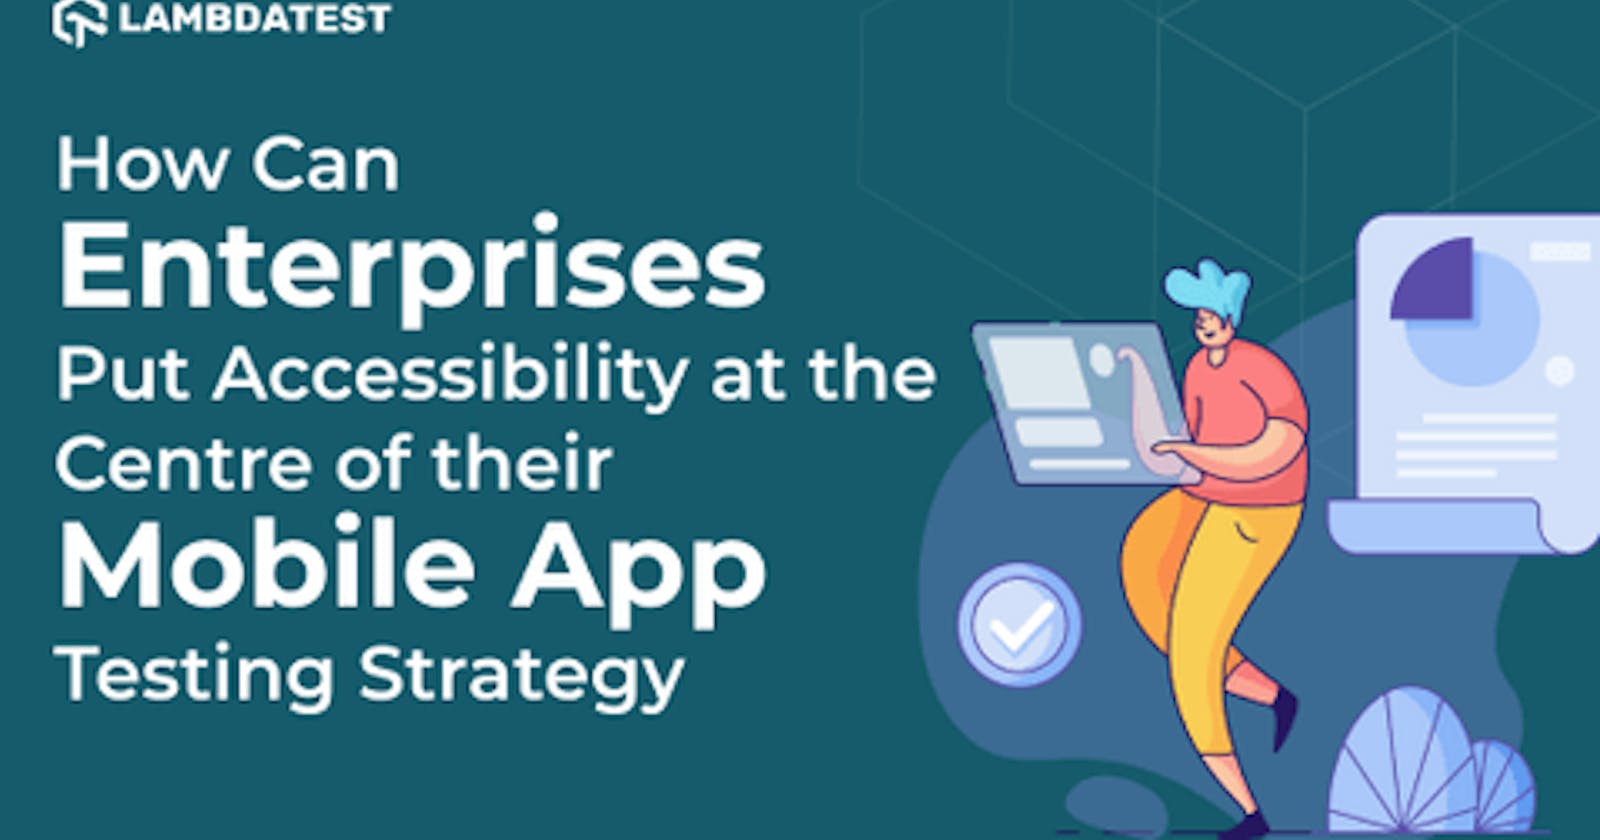 How Can Enterprises Put Accessibility at the Centre of their Mobile App Testing Strategy?